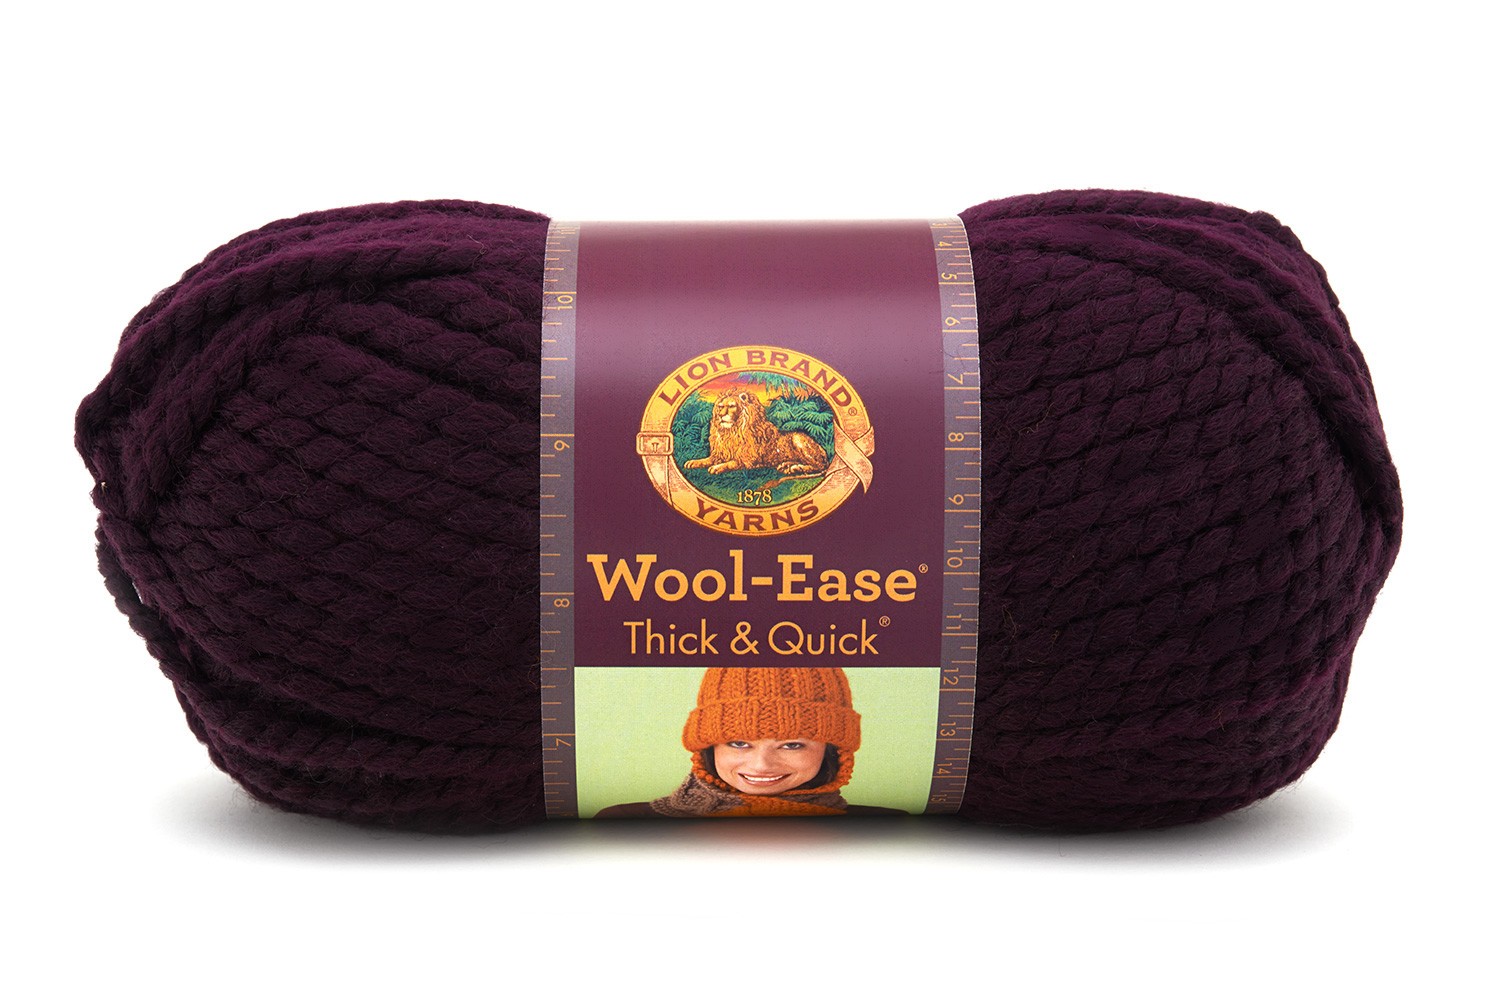 Wool-Ease Thick and Quick in Eggplant